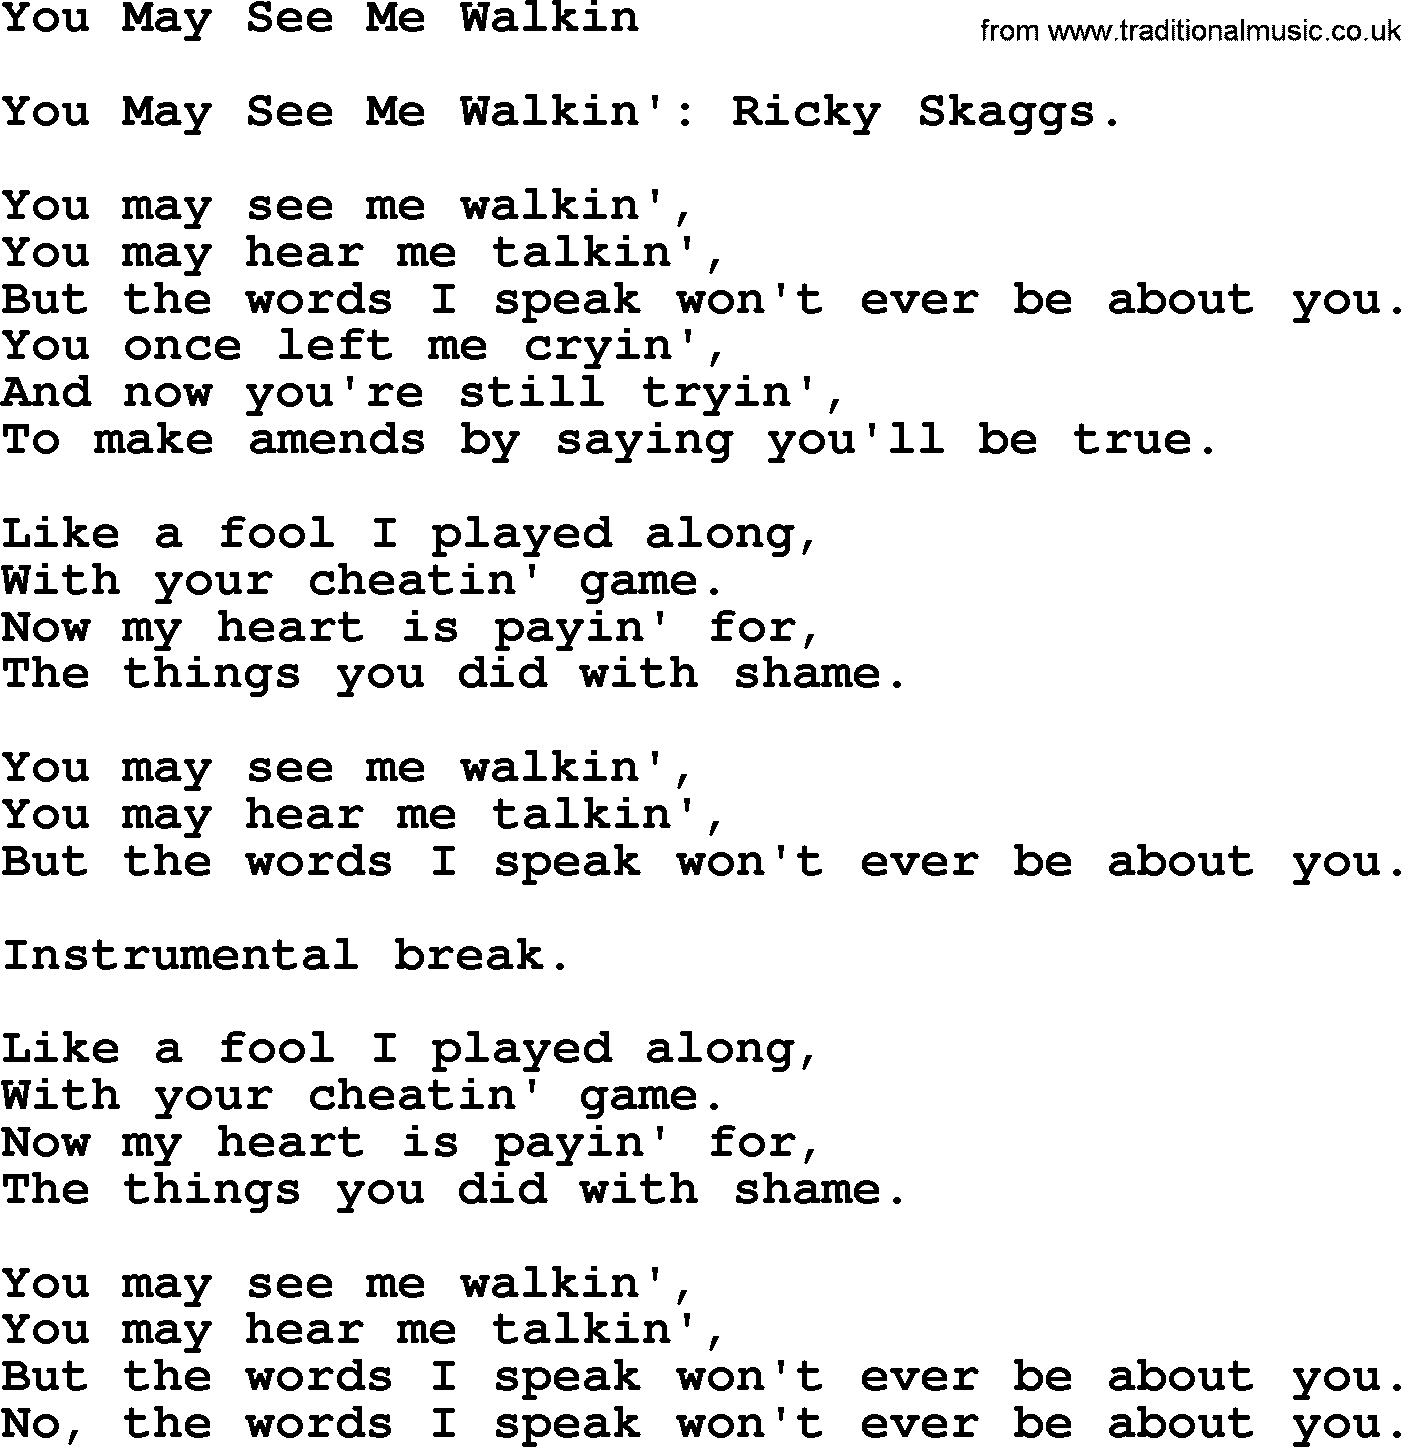 Bluegrass song: You May See Me Walkin, lyrics and chords